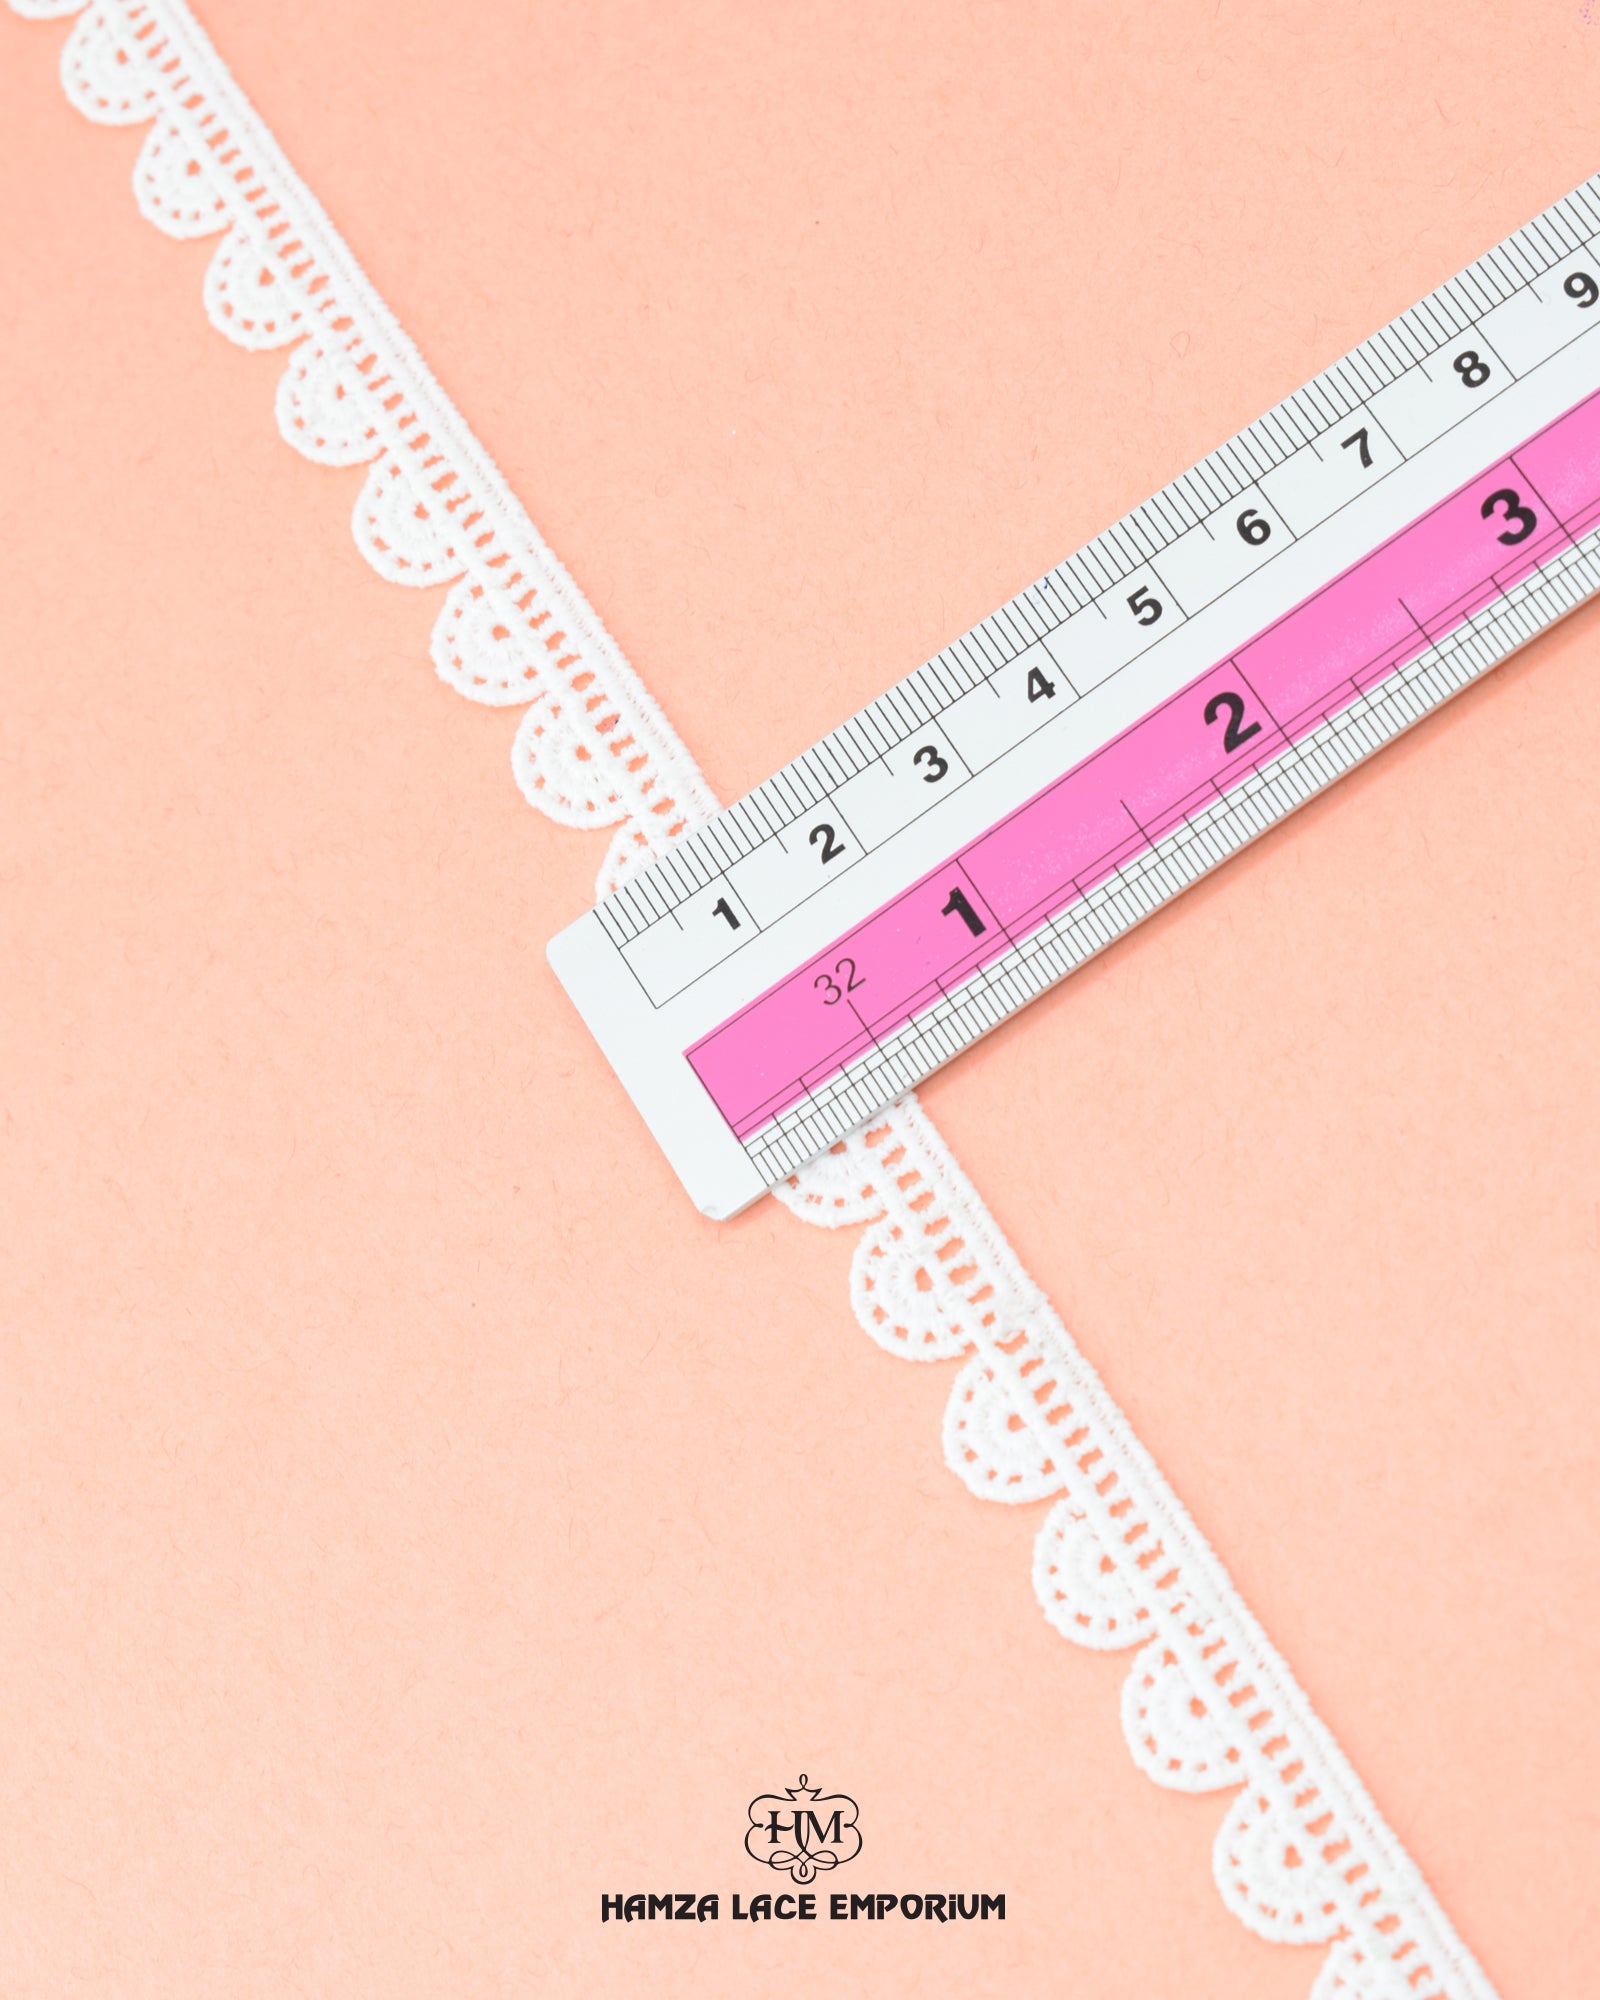 Size of the 'Edging Loop lace 2763' is shown as '0.5' inches with the help of a ruler